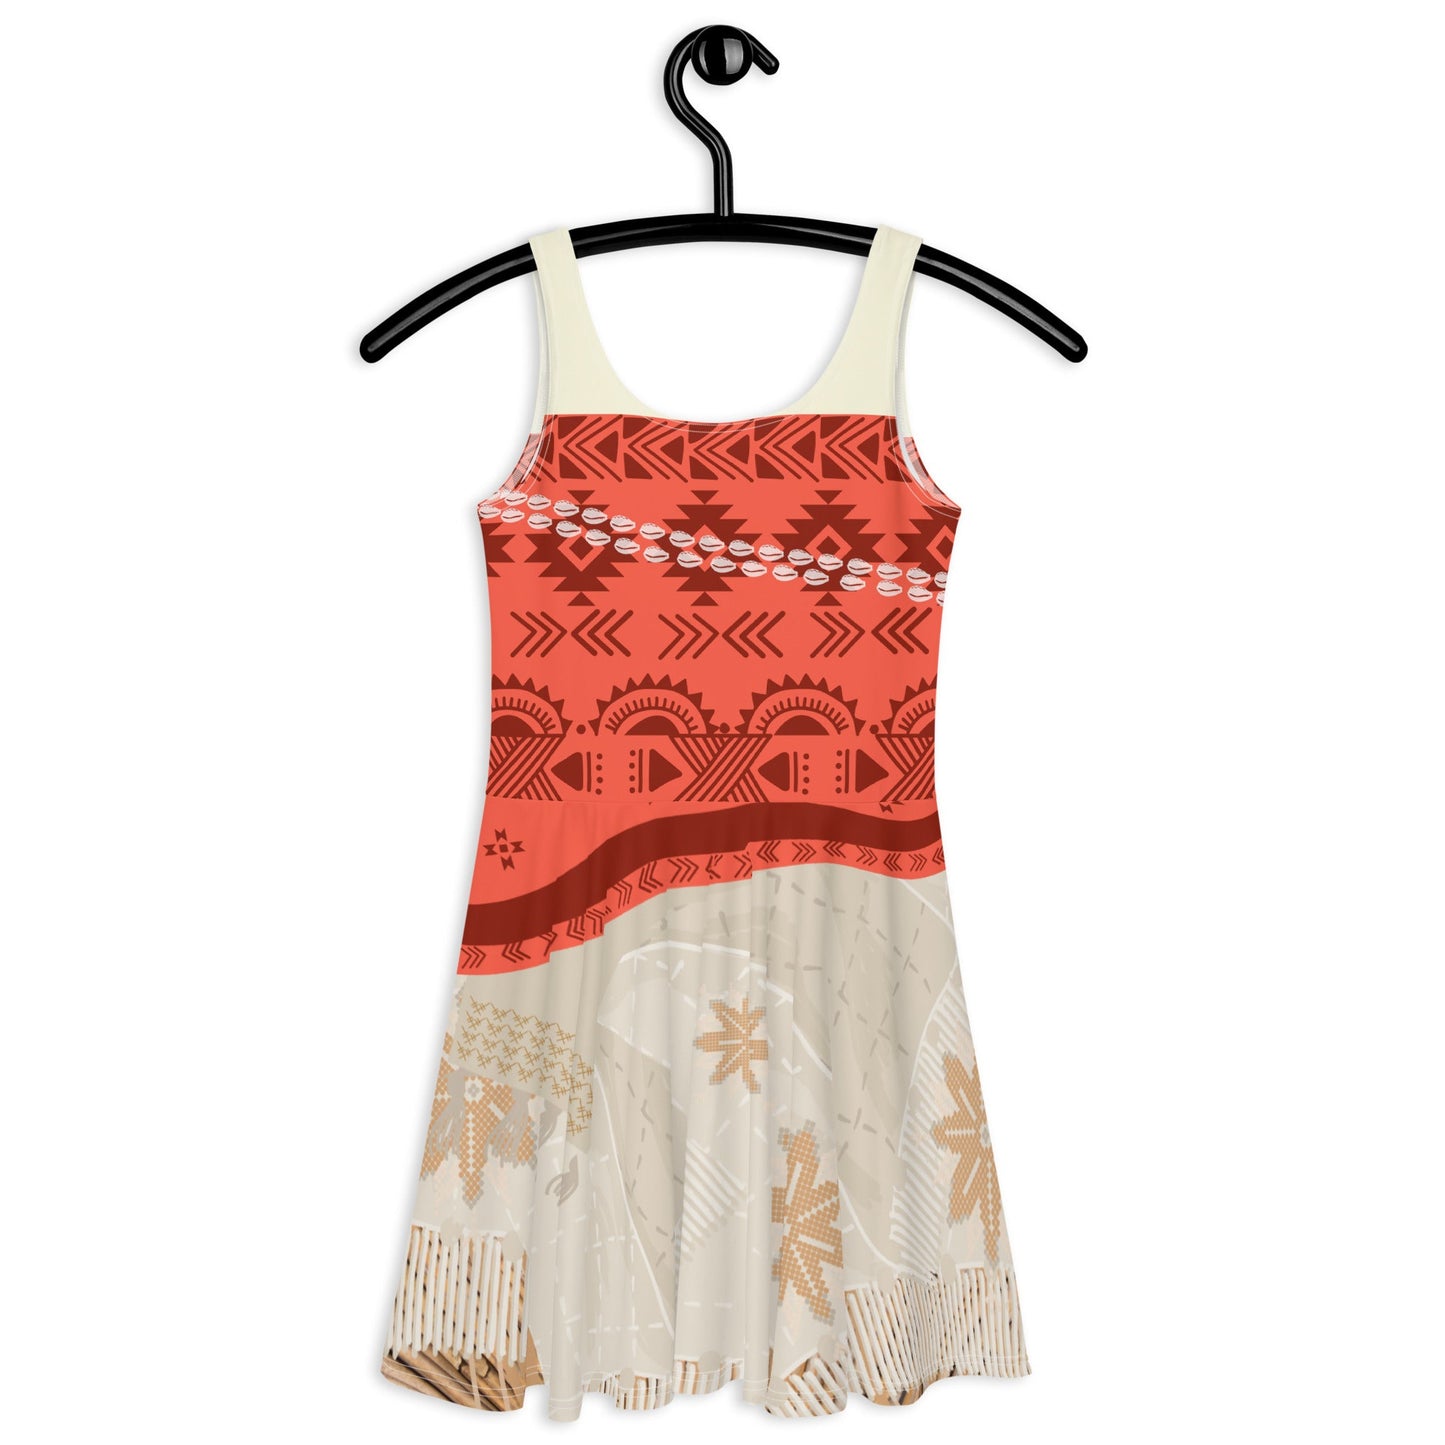 Where the Ocean meets the Sea Skater Dress adult moana dresscostumeWrong Lever Clothing